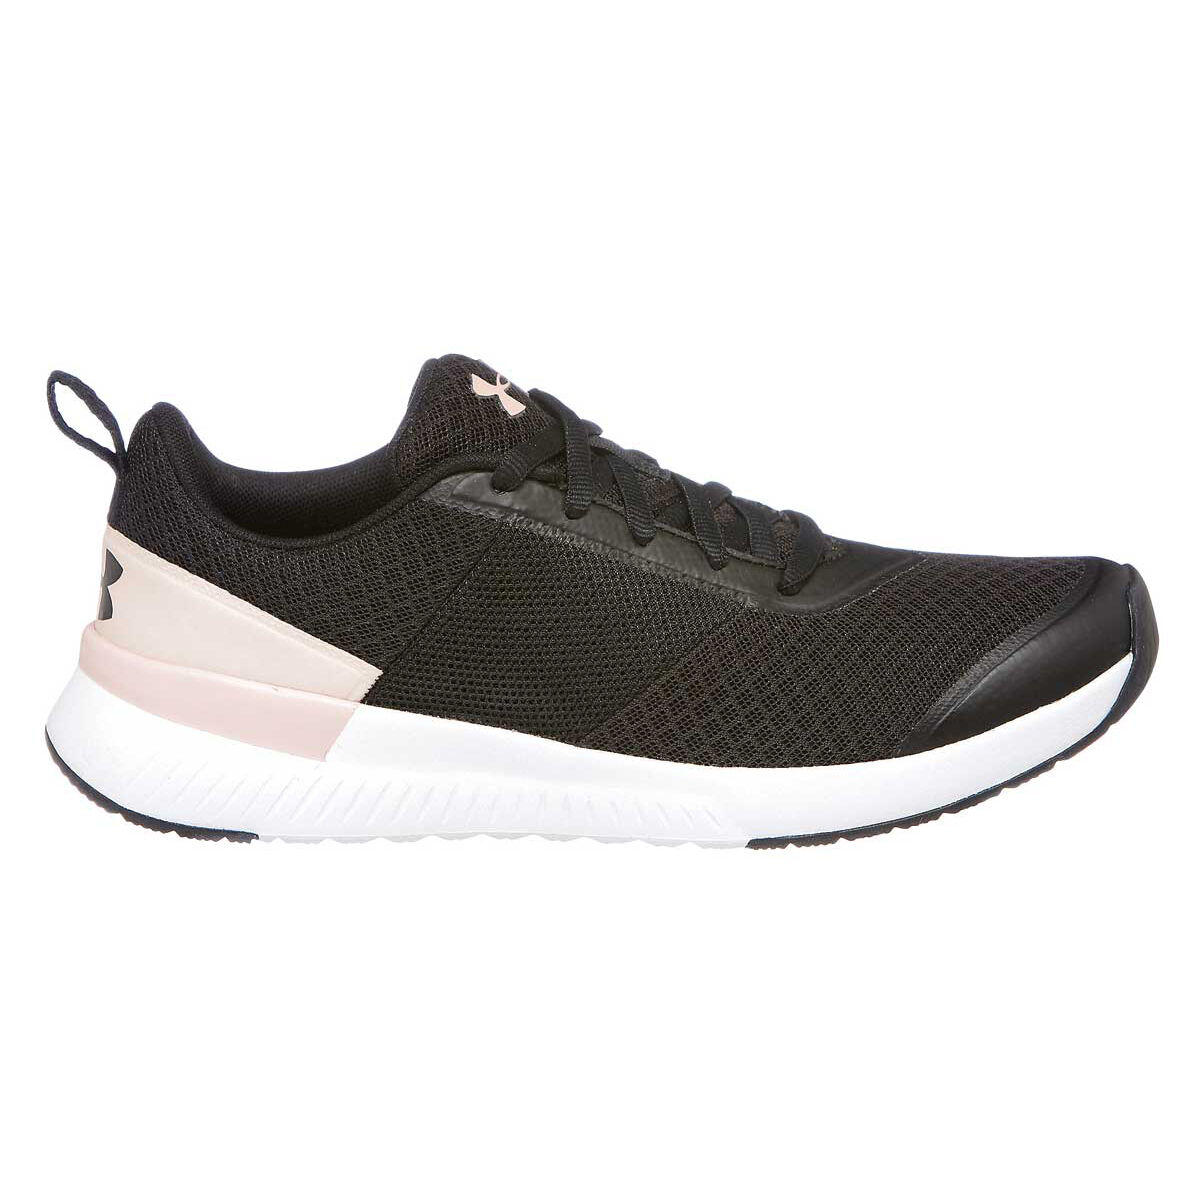 under armour shoes women's pink